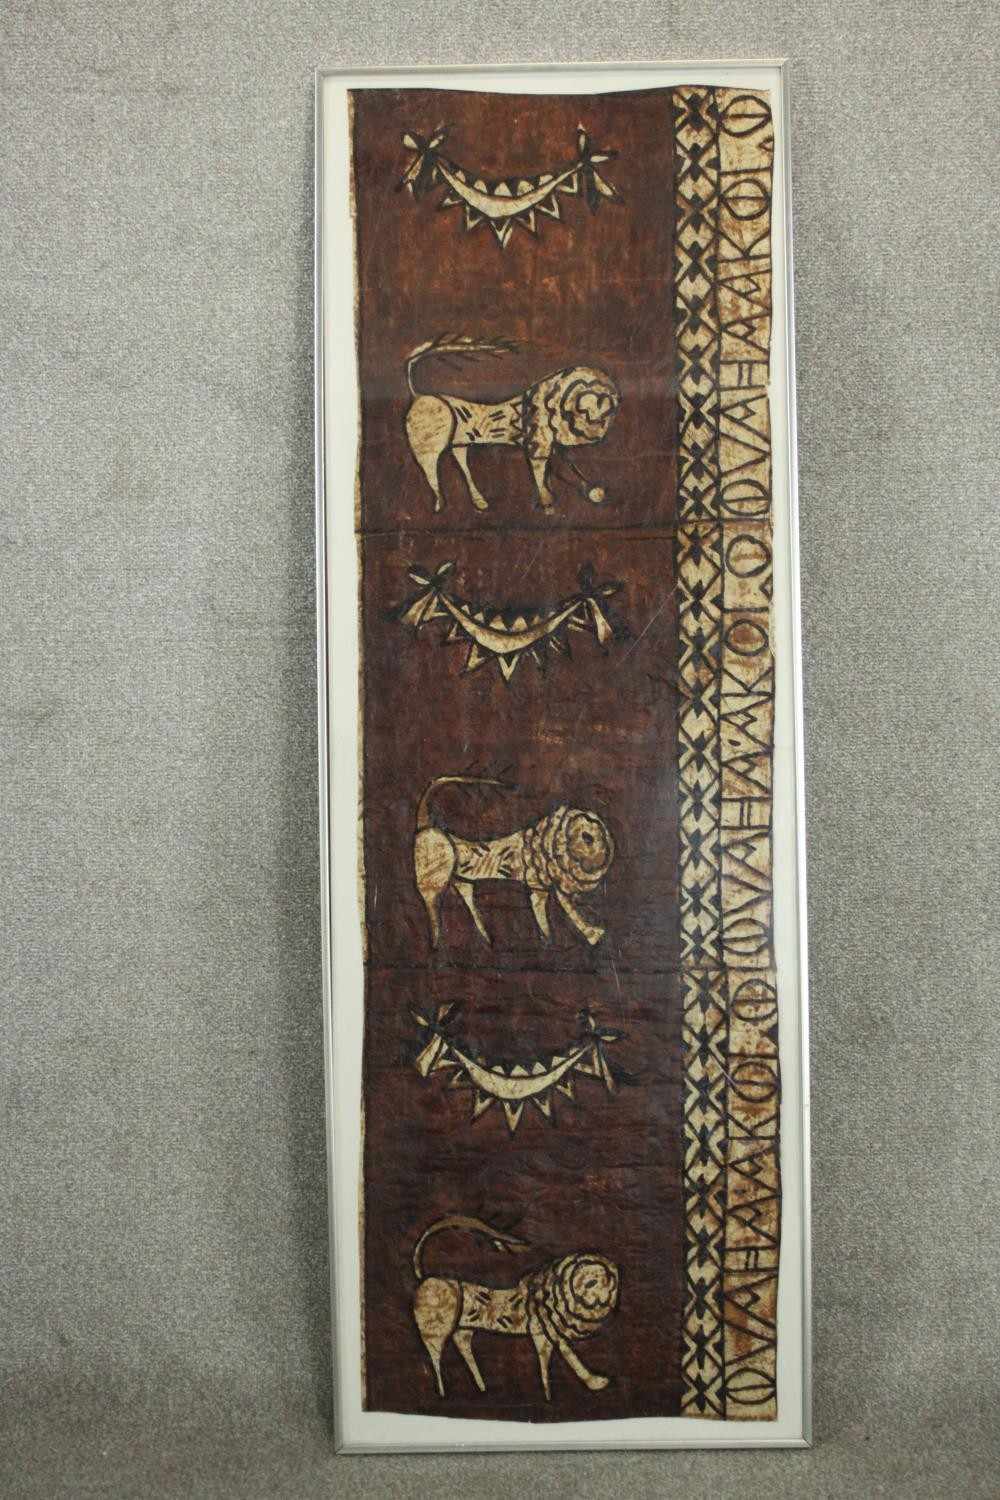 Two large Tonganese Tapa cloth wall hangings, one depicting animals and one depicting stylised trees - Image 9 of 10